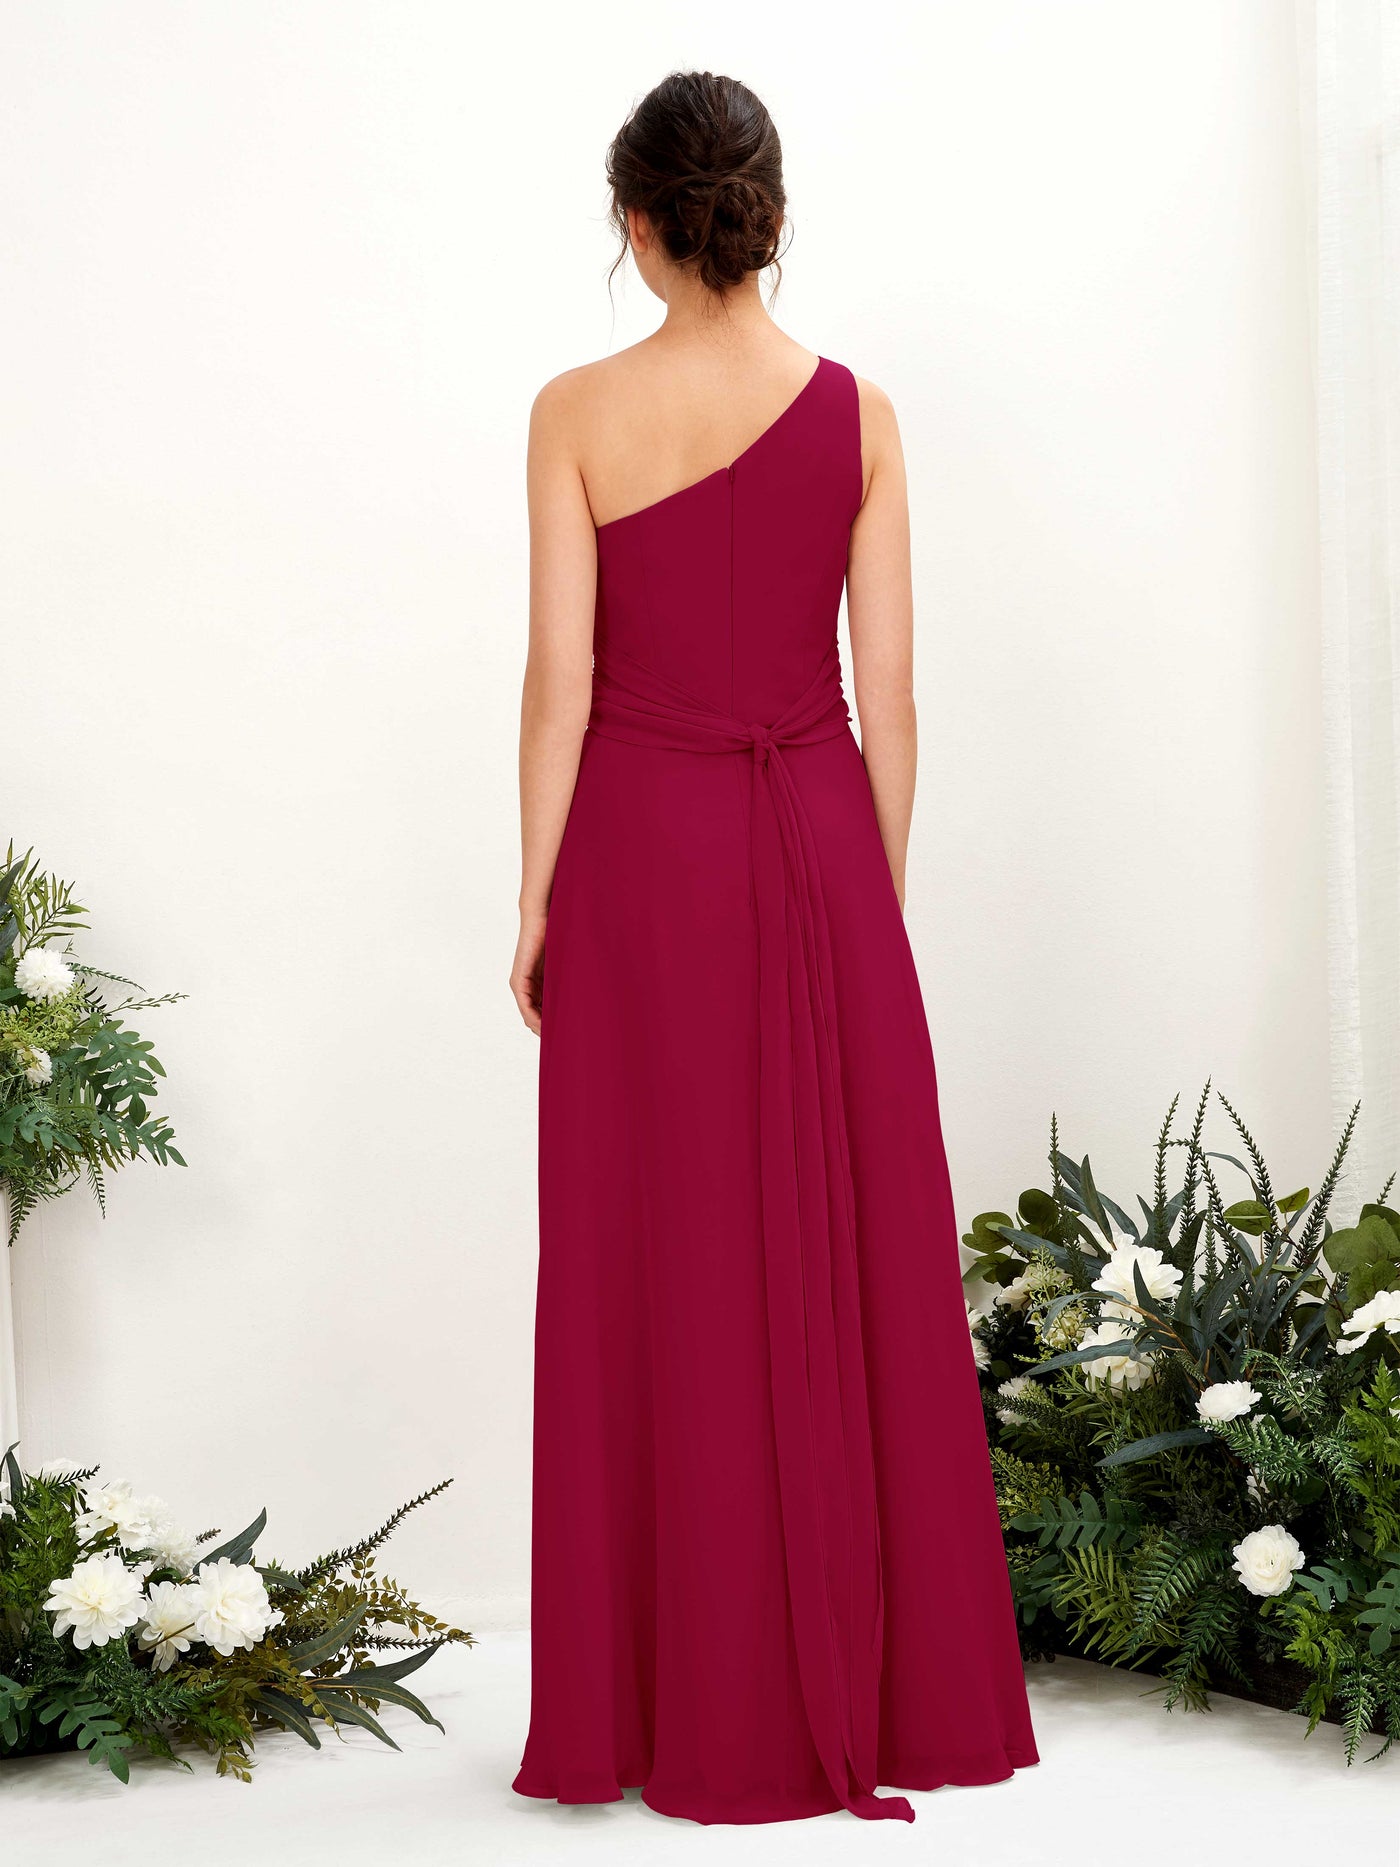 Jester Red Bridesmaid Dresses Bridesmaid Dress A-line Chiffon One Shoulder Full Length Sleeveless Wedding Party Dress (81224741)#color_jester-red